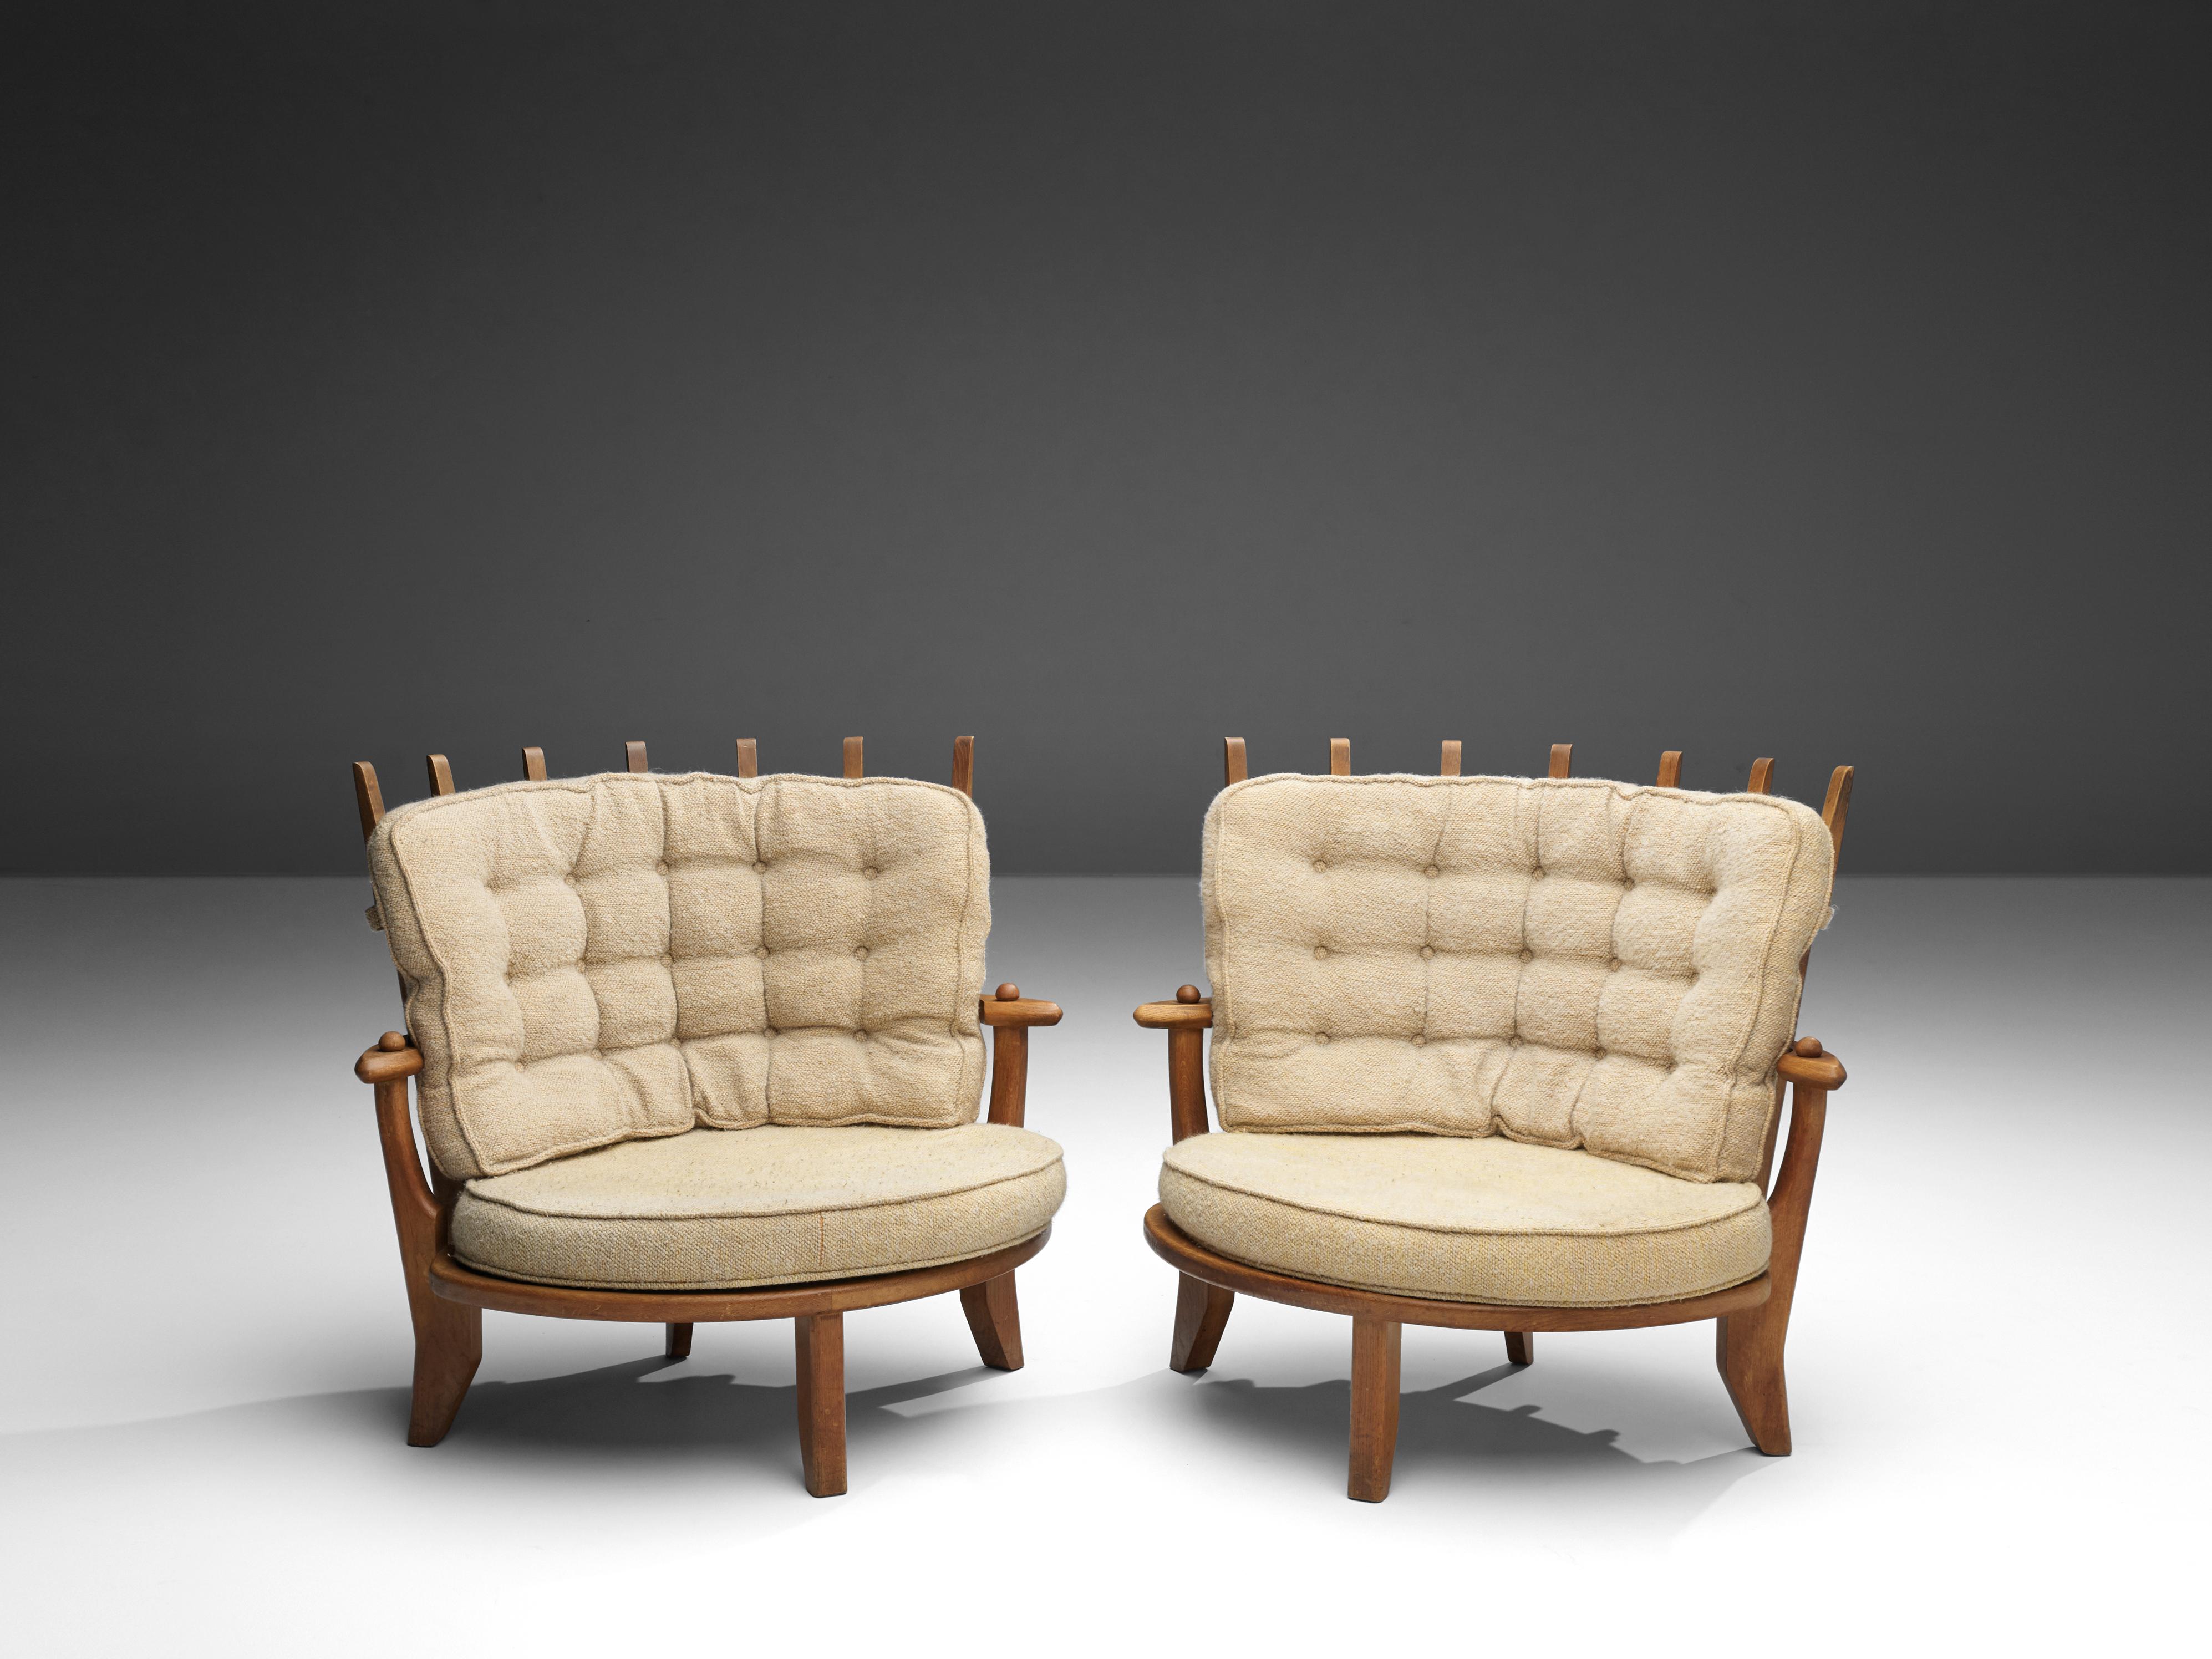 Guillerme et Chambron, lounge chairs, in oak and cream colored fabric, France, 1960s 

Guillerme et Chambron designed the 'Tricoteuse' in solid oak with the typical characteristic decorative details at the back and capricious shaped legs. Very